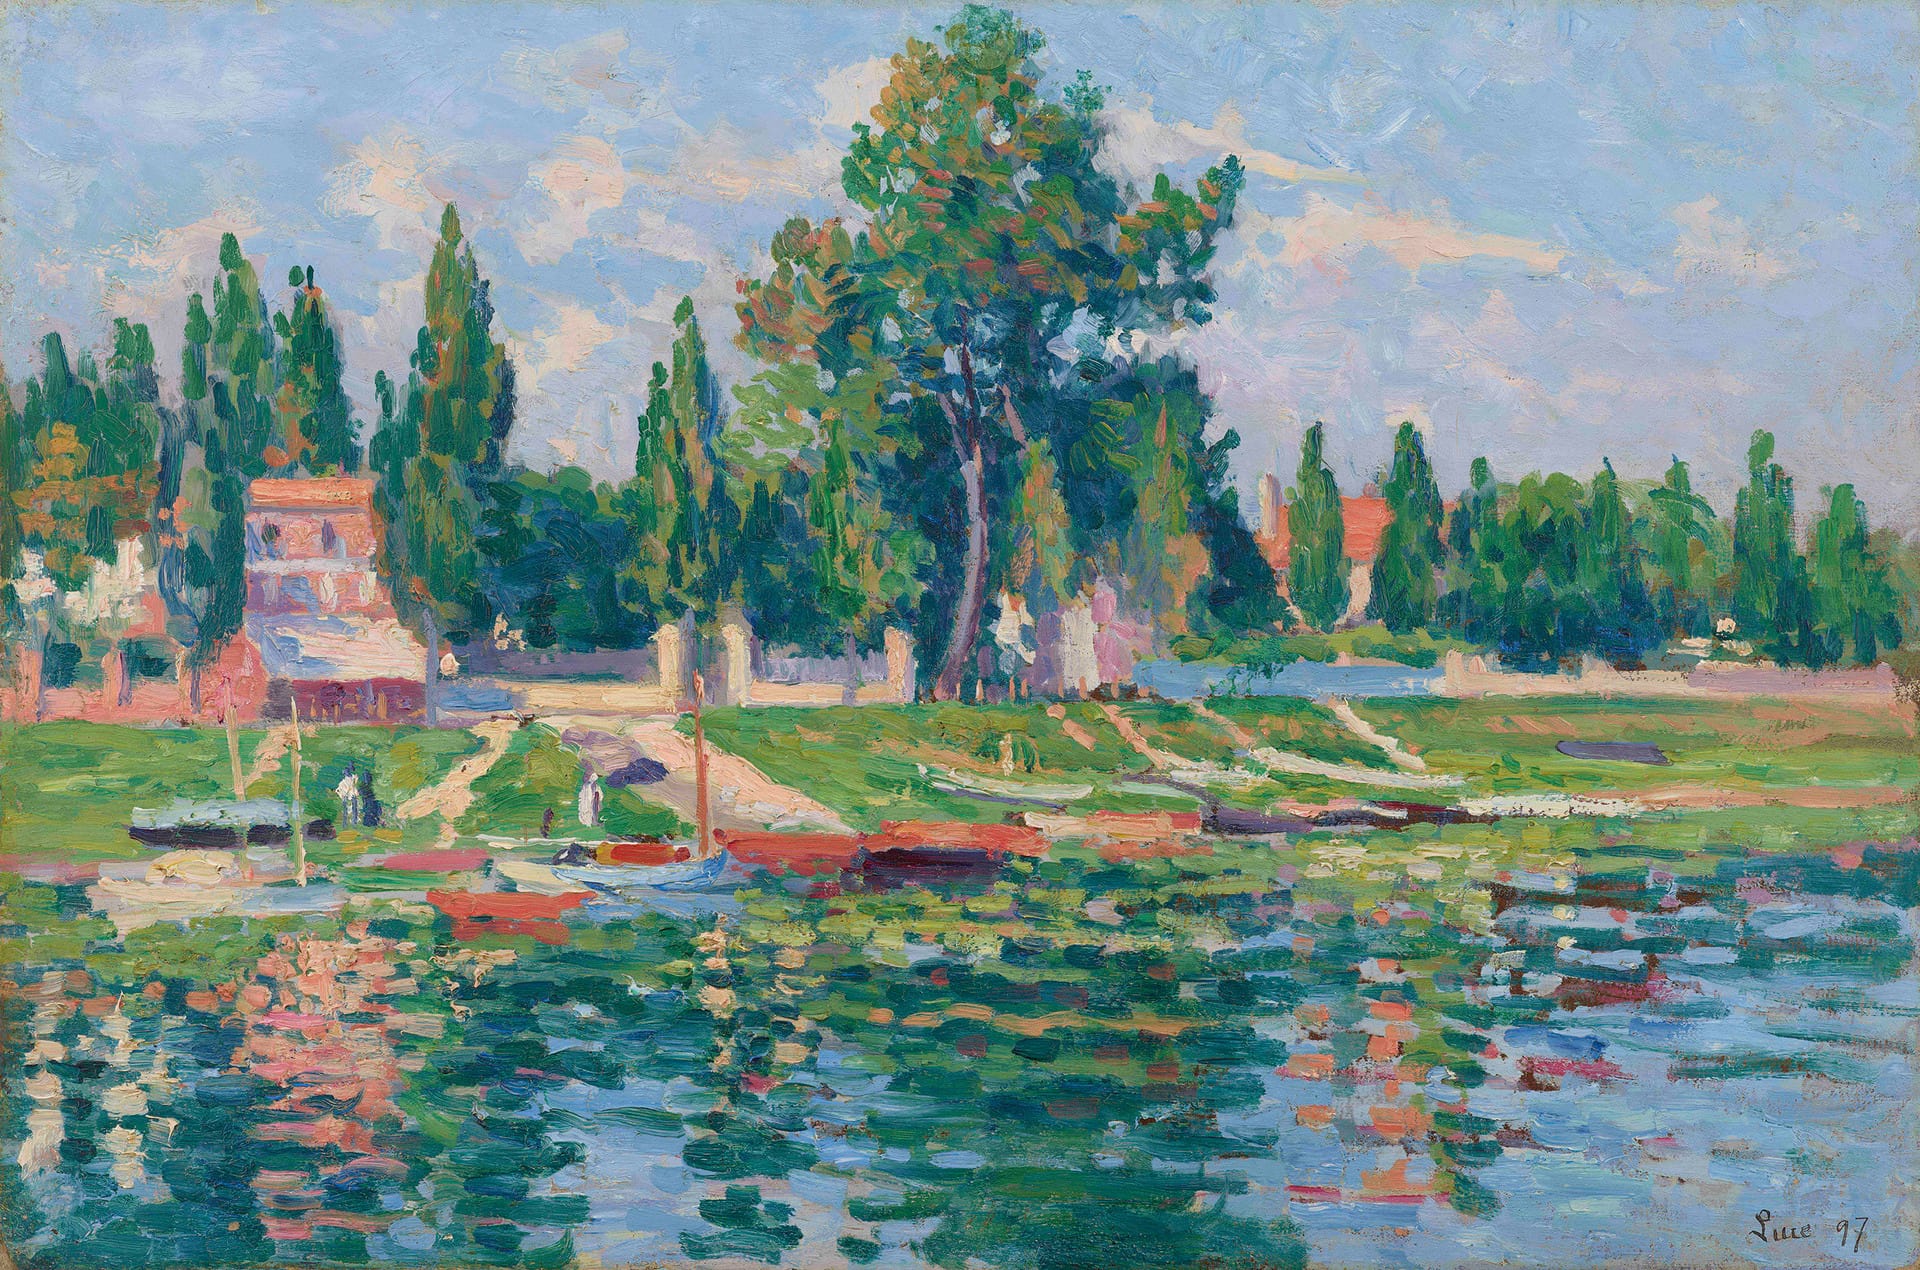 Maximilien Luce. Impressionist brushwork. Proto-Fauvist colors. Vibrant pinks, greens, and blues. River scene with boats.